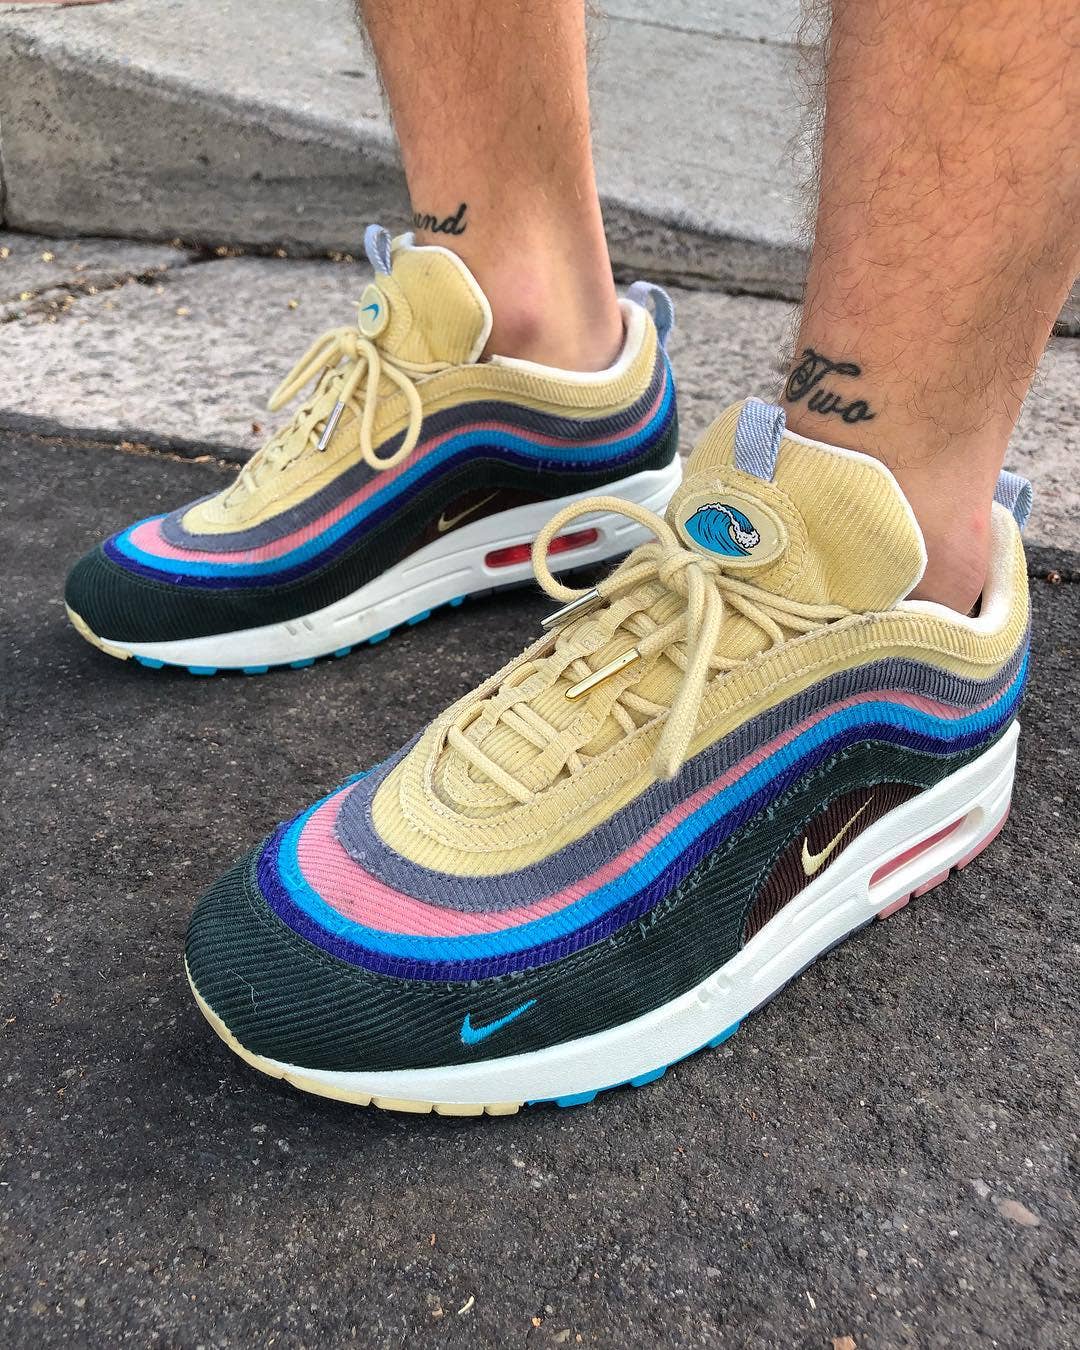 Recuperar Me preparé Email Sean Wotherspoon's Nike Air Max Hybrid Is Releasing Early | Complex